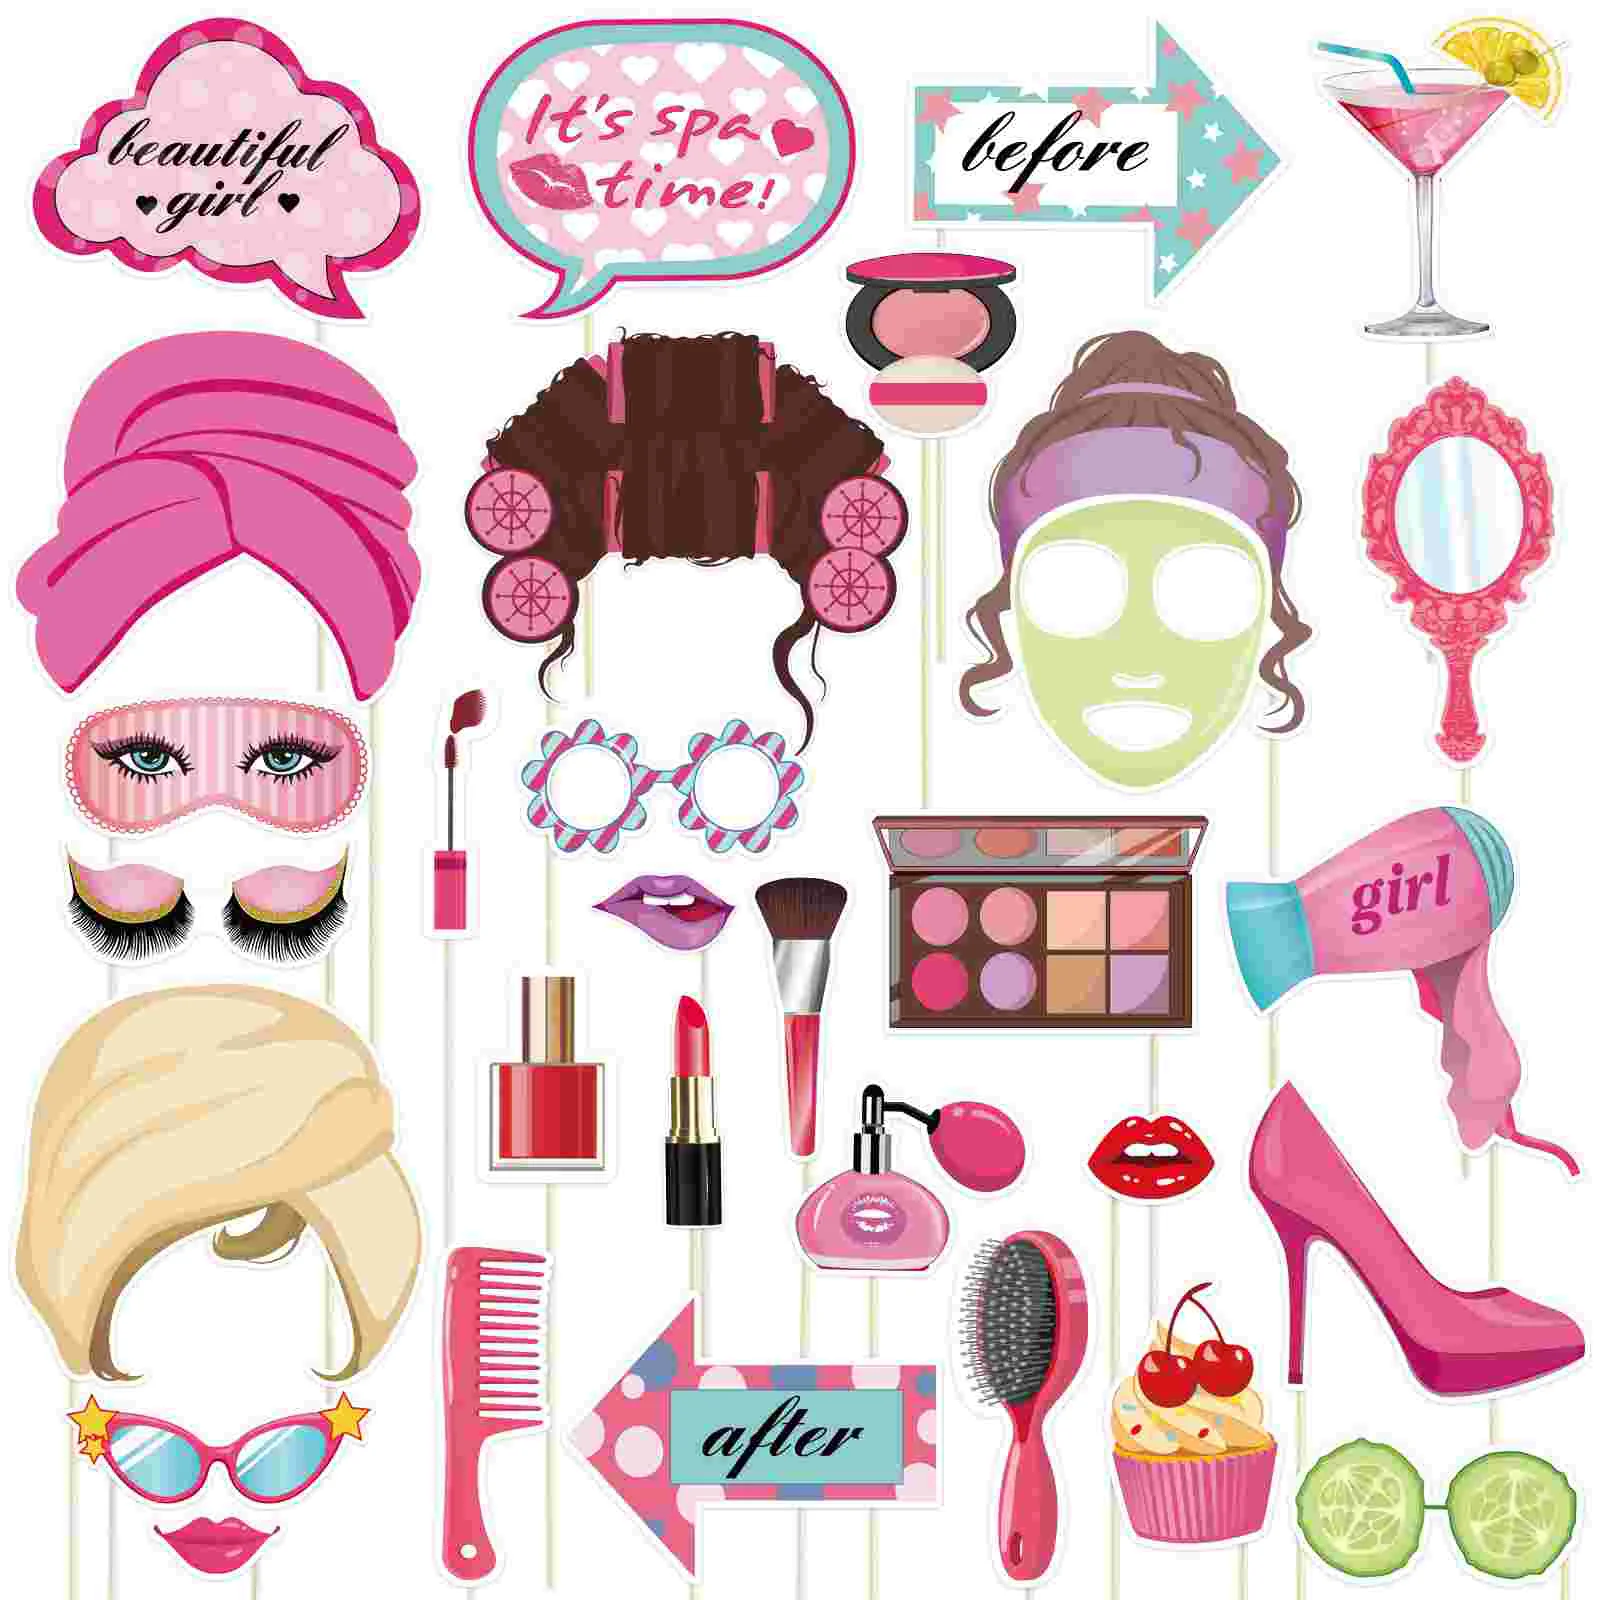 

Spa Party Props Girls Photo Day Supplies Decorations Makeup Booth Theme Selfie Favors Backdrop Birthday Sleepover Fashion Plates